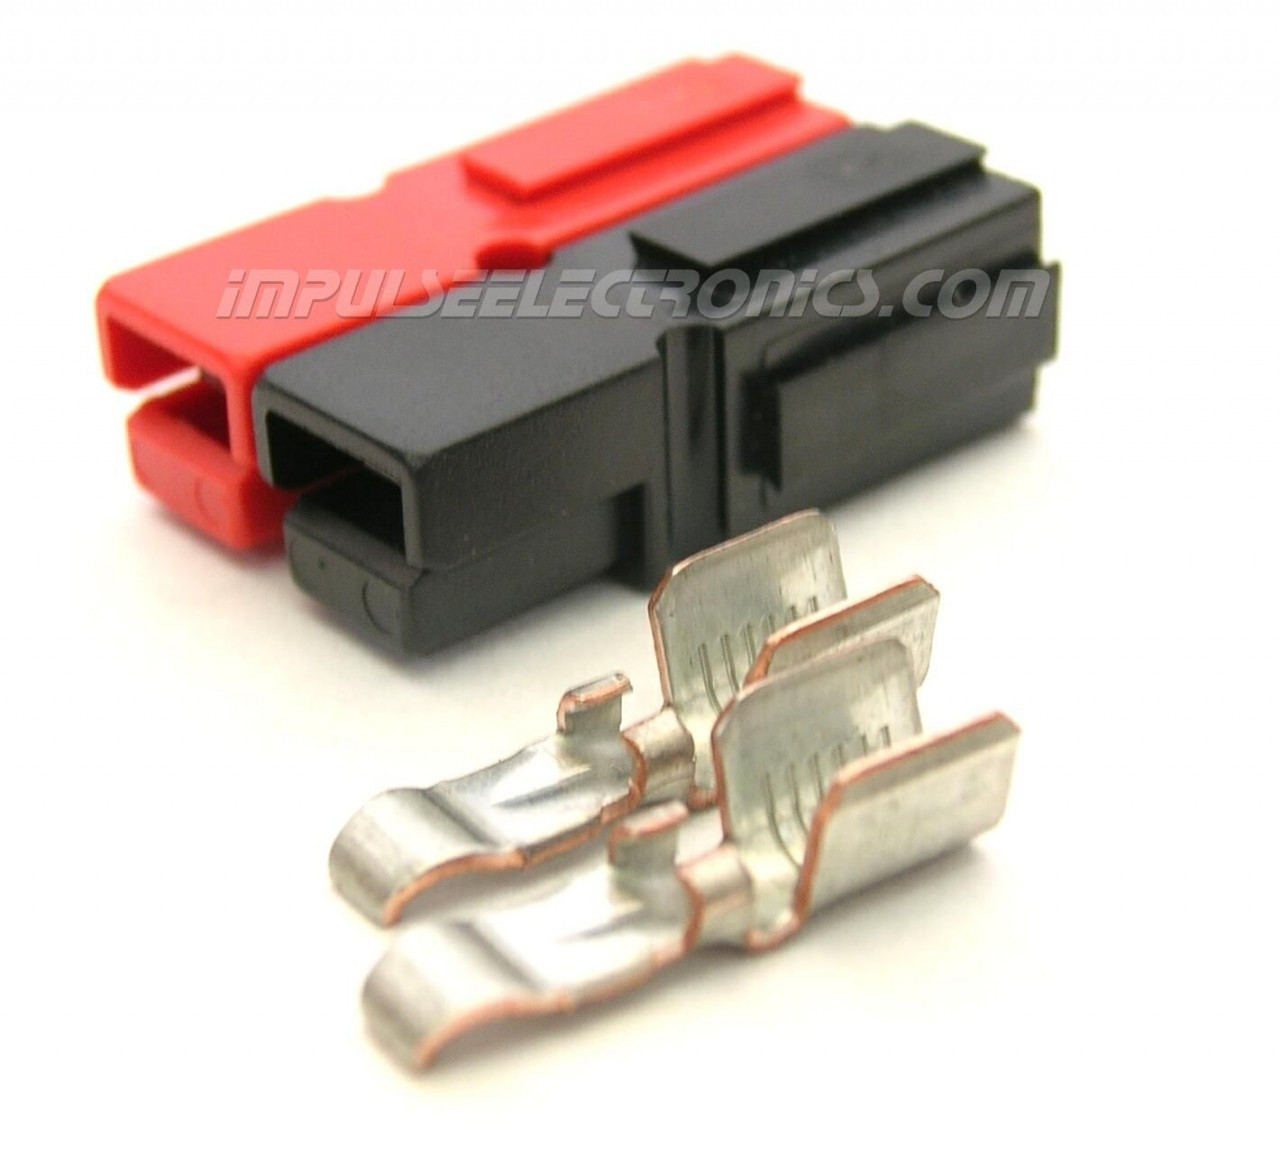 Powerpole Connector, 45 Amp Contacts, Red & Black Housings, Bonded